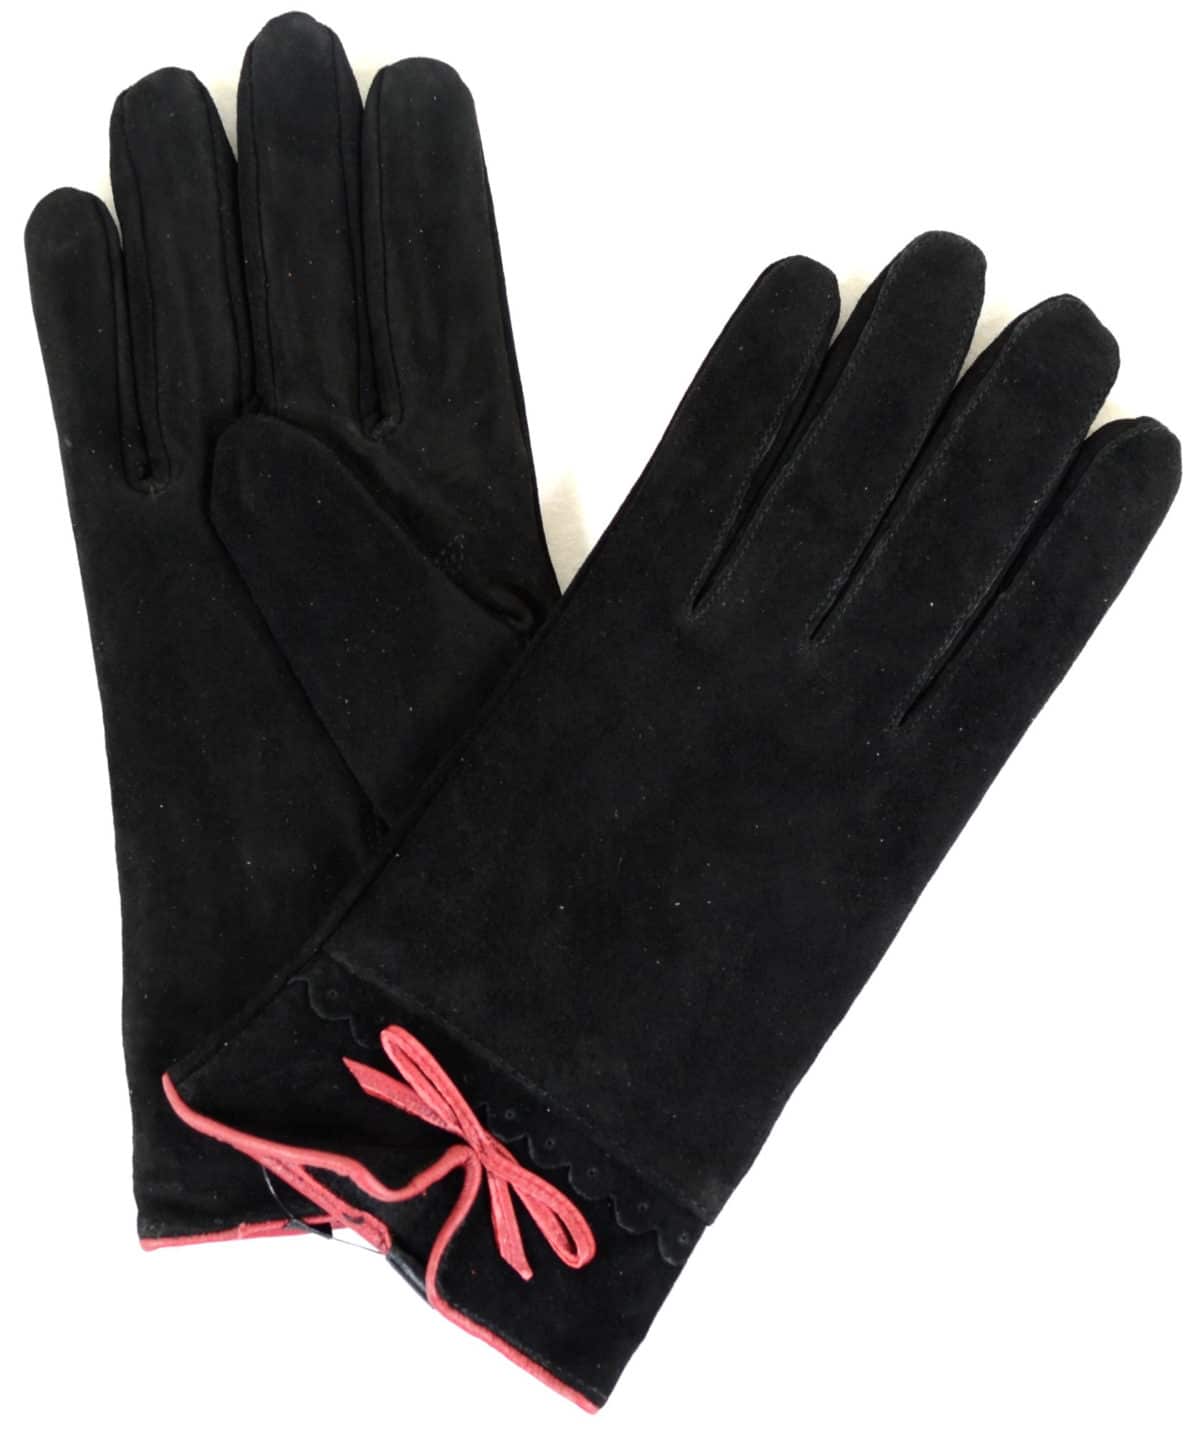 Suede Gloves Fleece Lining and Bow Feature - Black